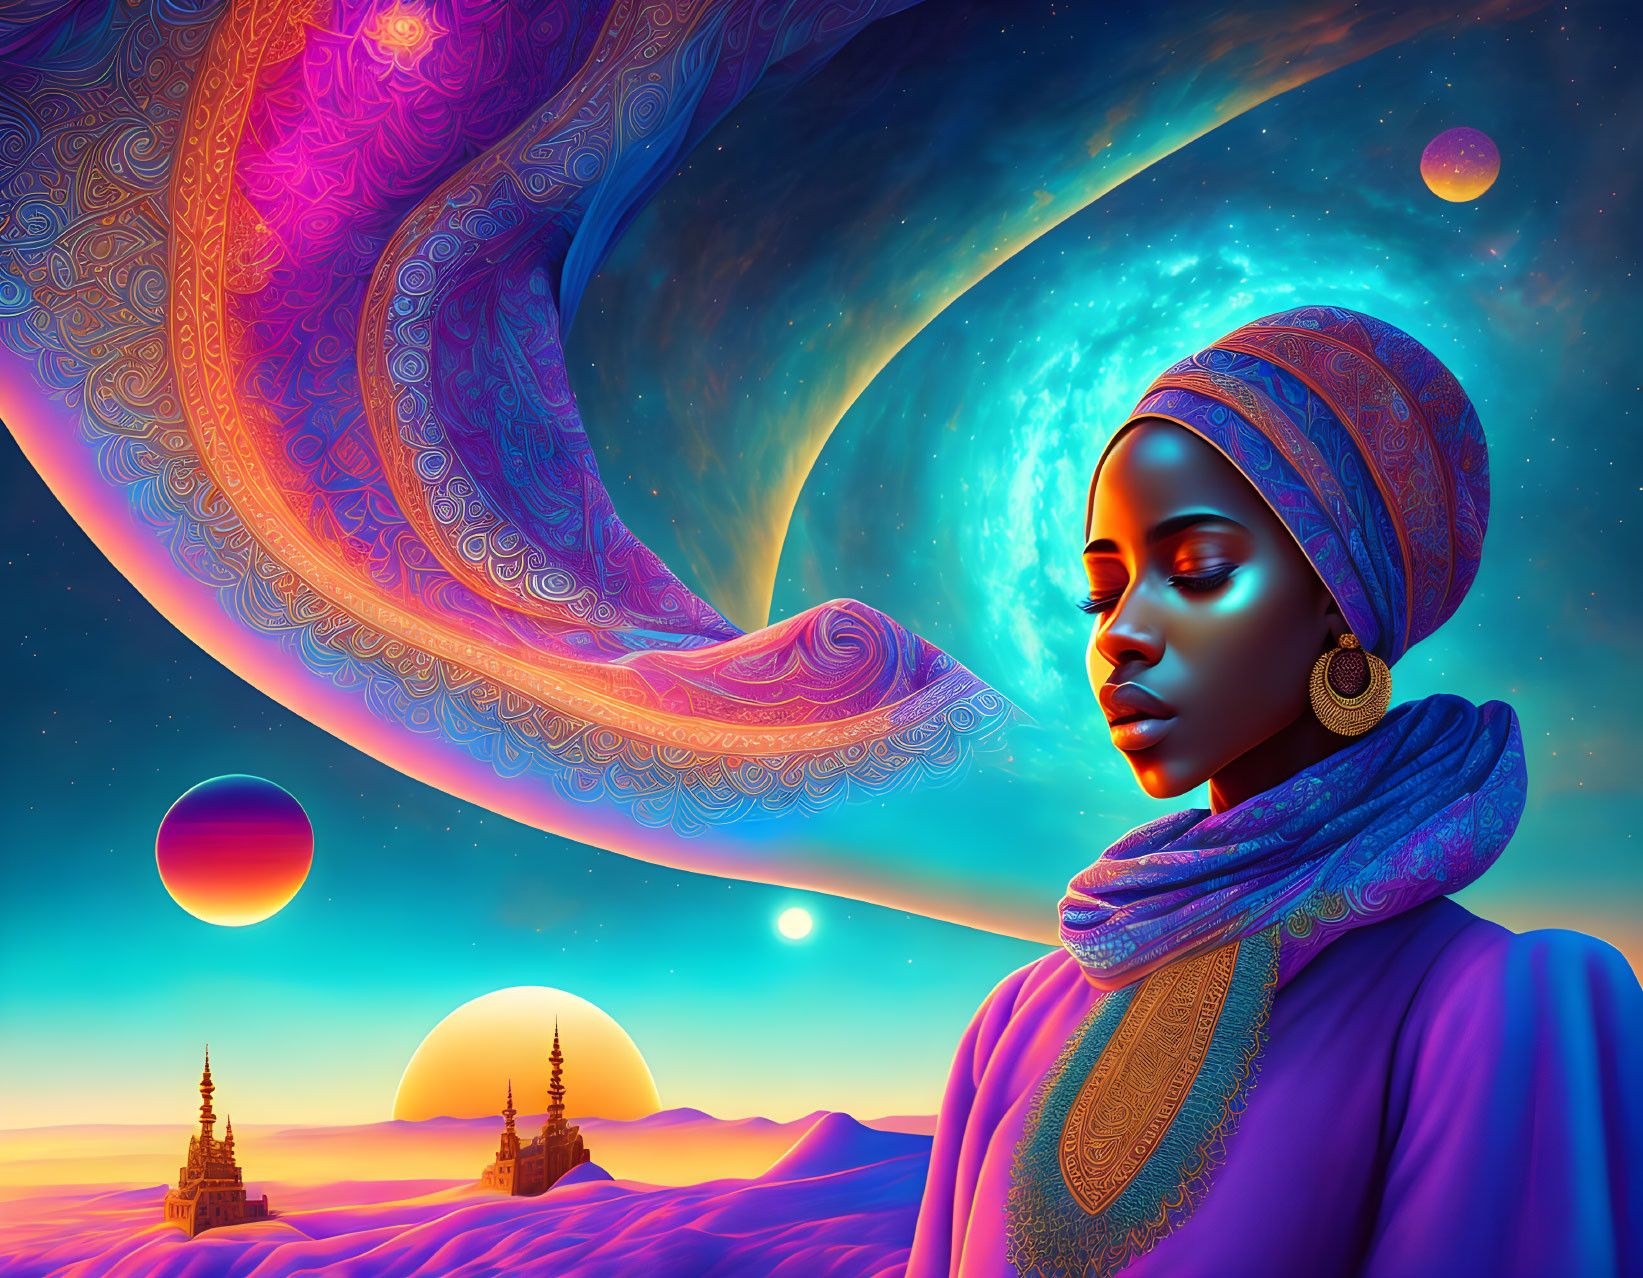 Vibrant surreal portrait of a woman with headscarf in cosmic setting